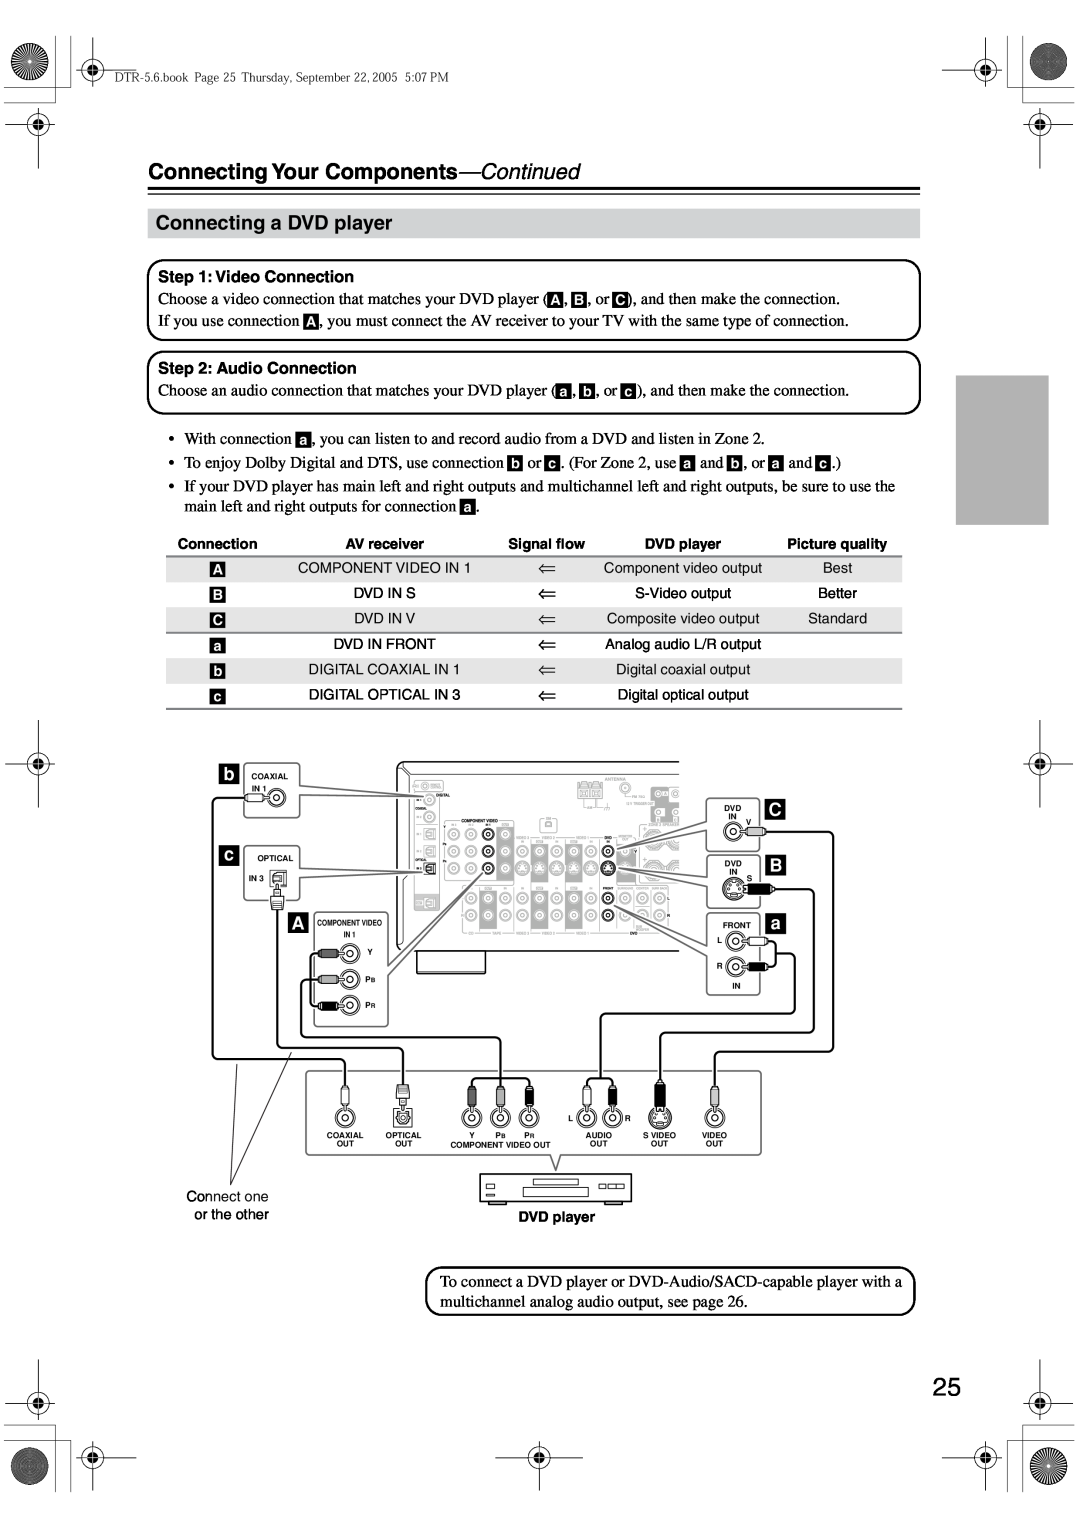 Integra DTR-5.6 instruction manual Connecting a DVD player, Connecting Your Components—Continued, C B a, or the other 